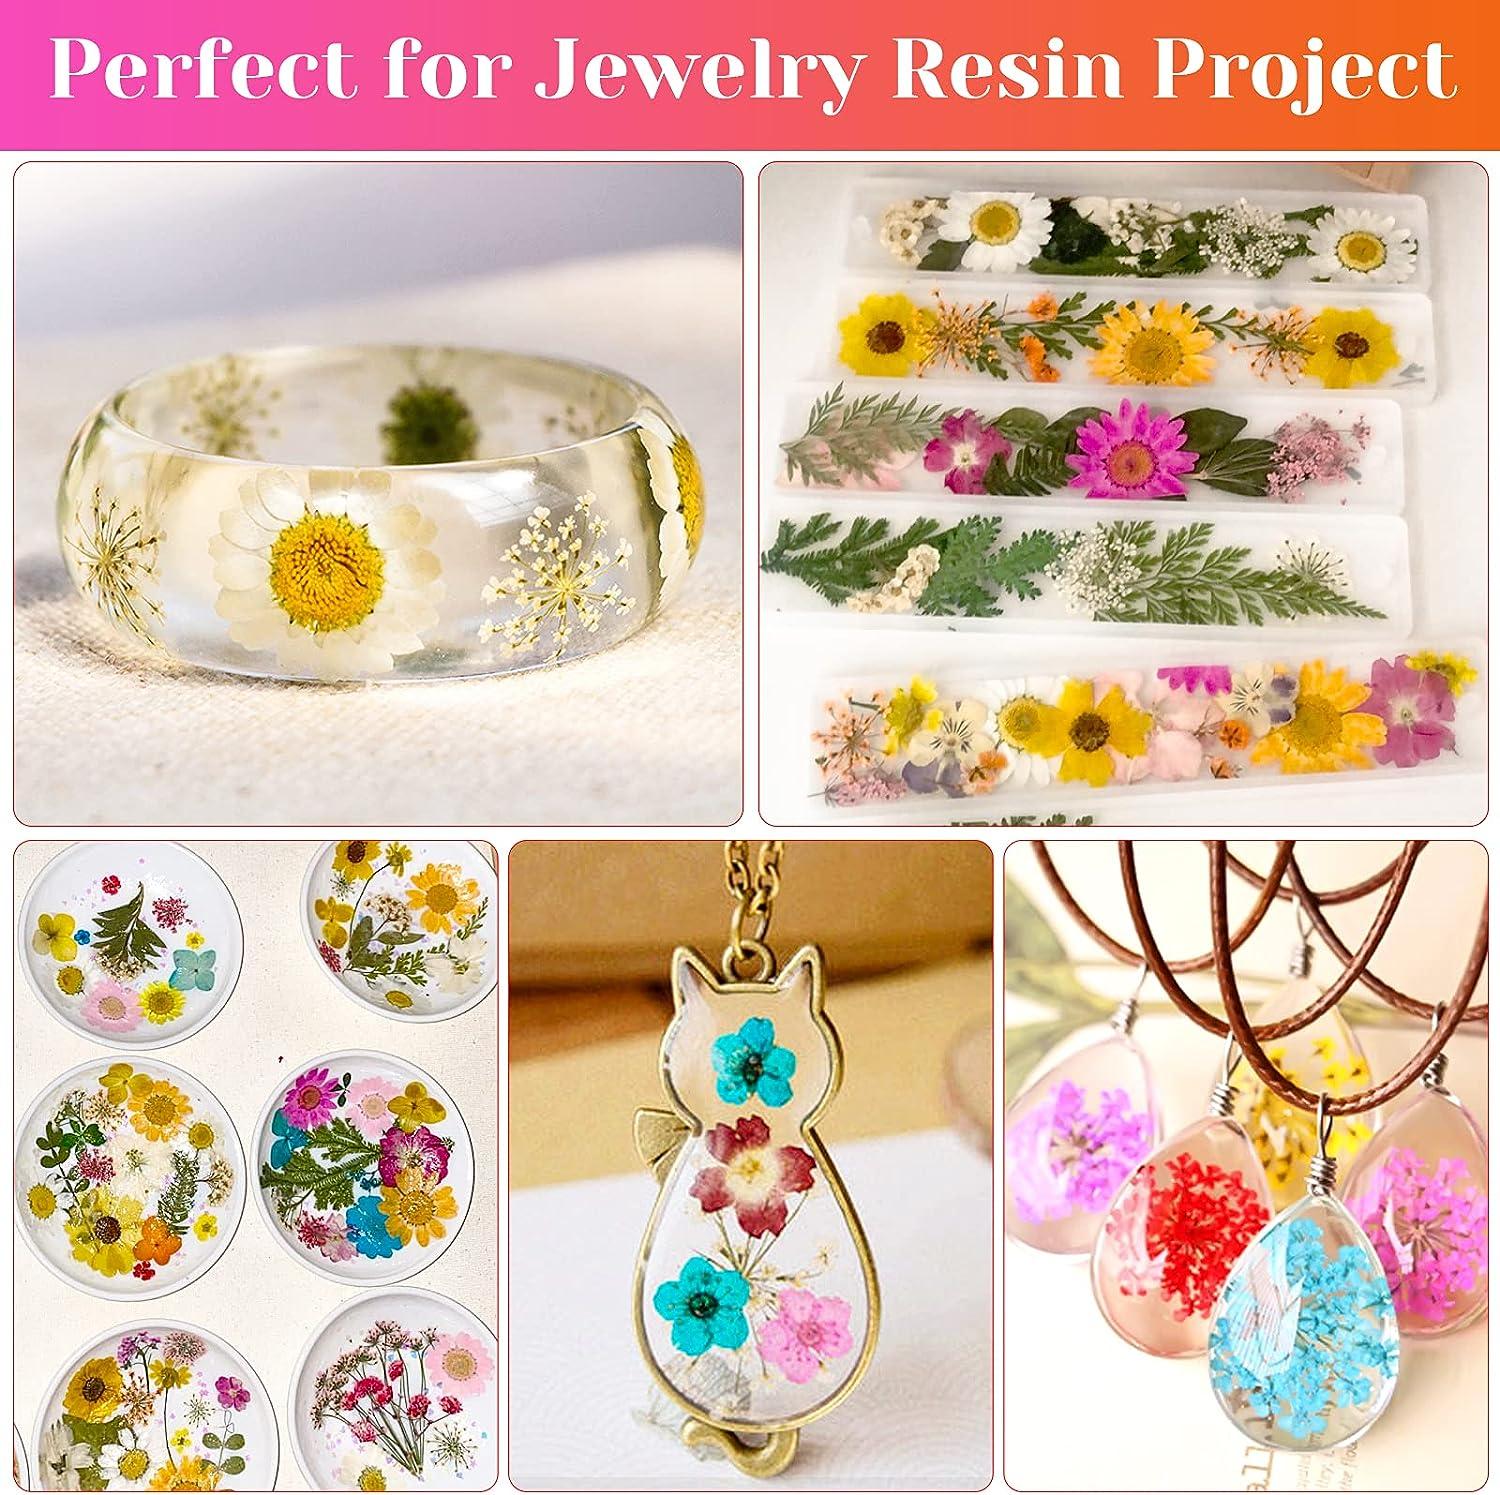 Real Dried Pressed Flowers For Resin Molds Rose Dried Flower Herbs